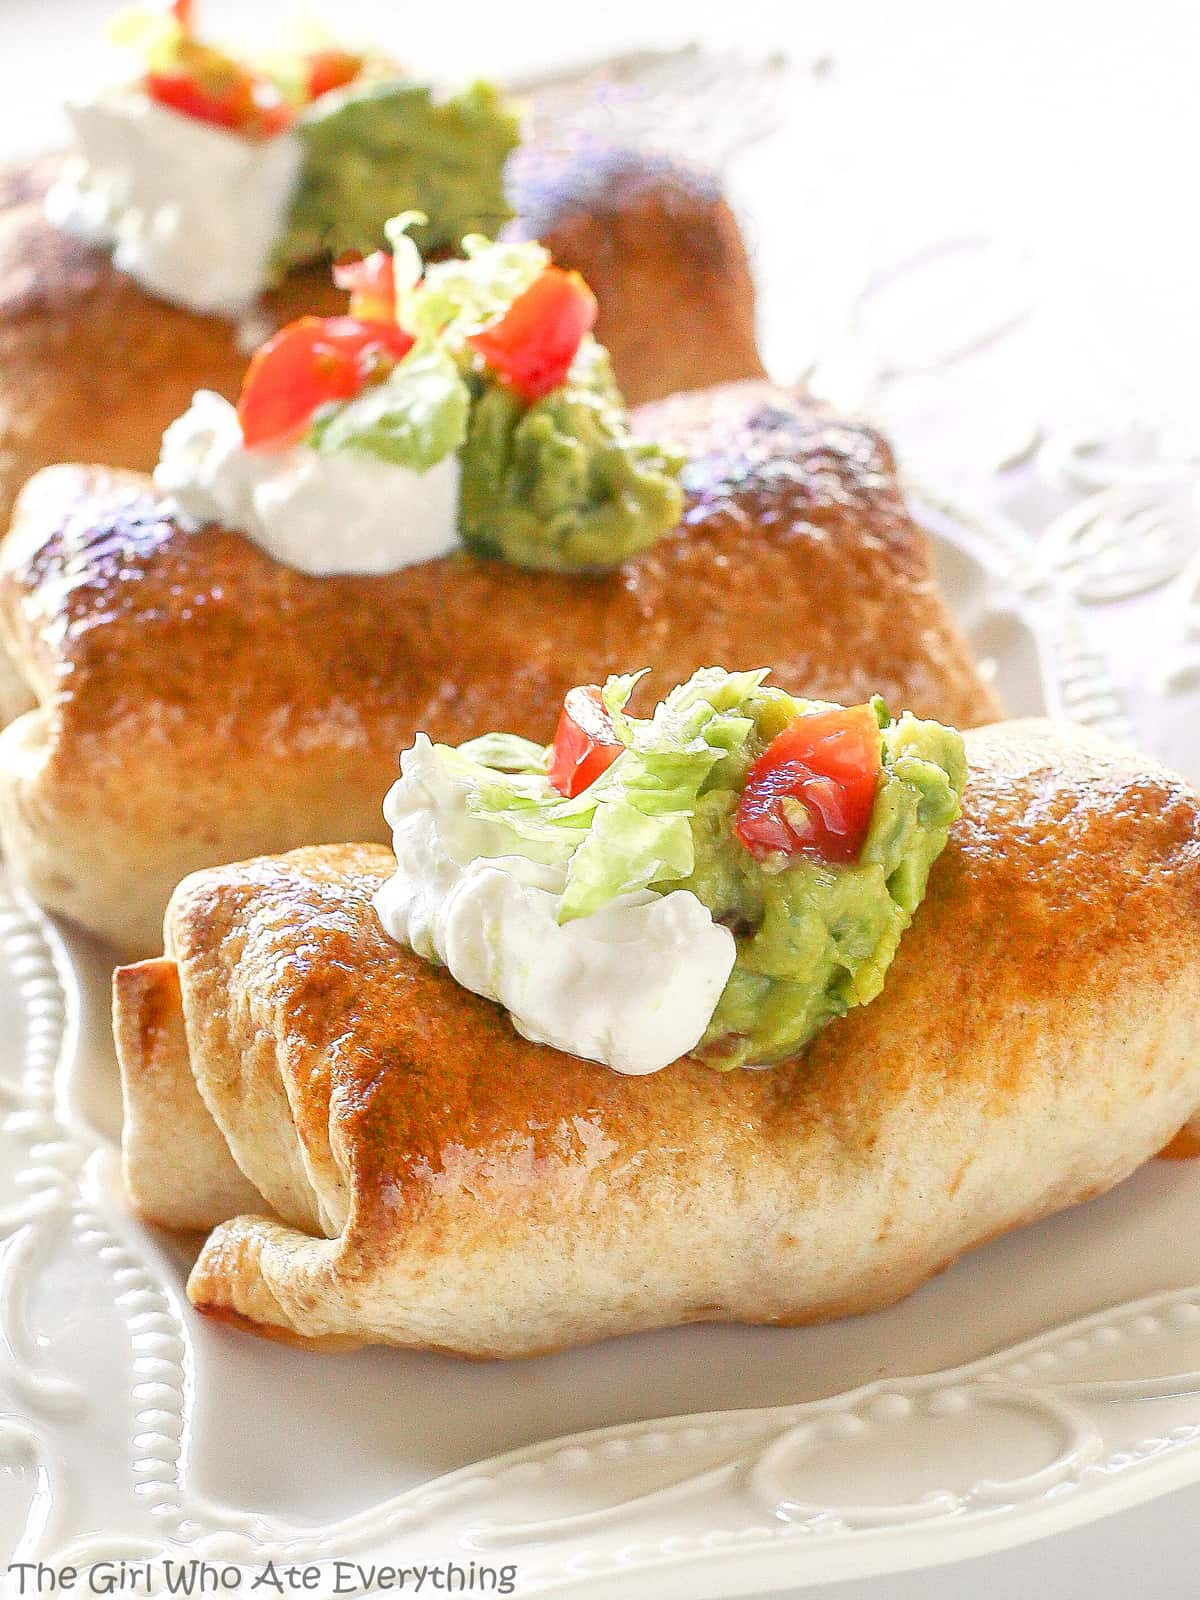 Baked Chicken Chimichangas Unique Baked Chicken Chimichangas Recipe the Girl who ate